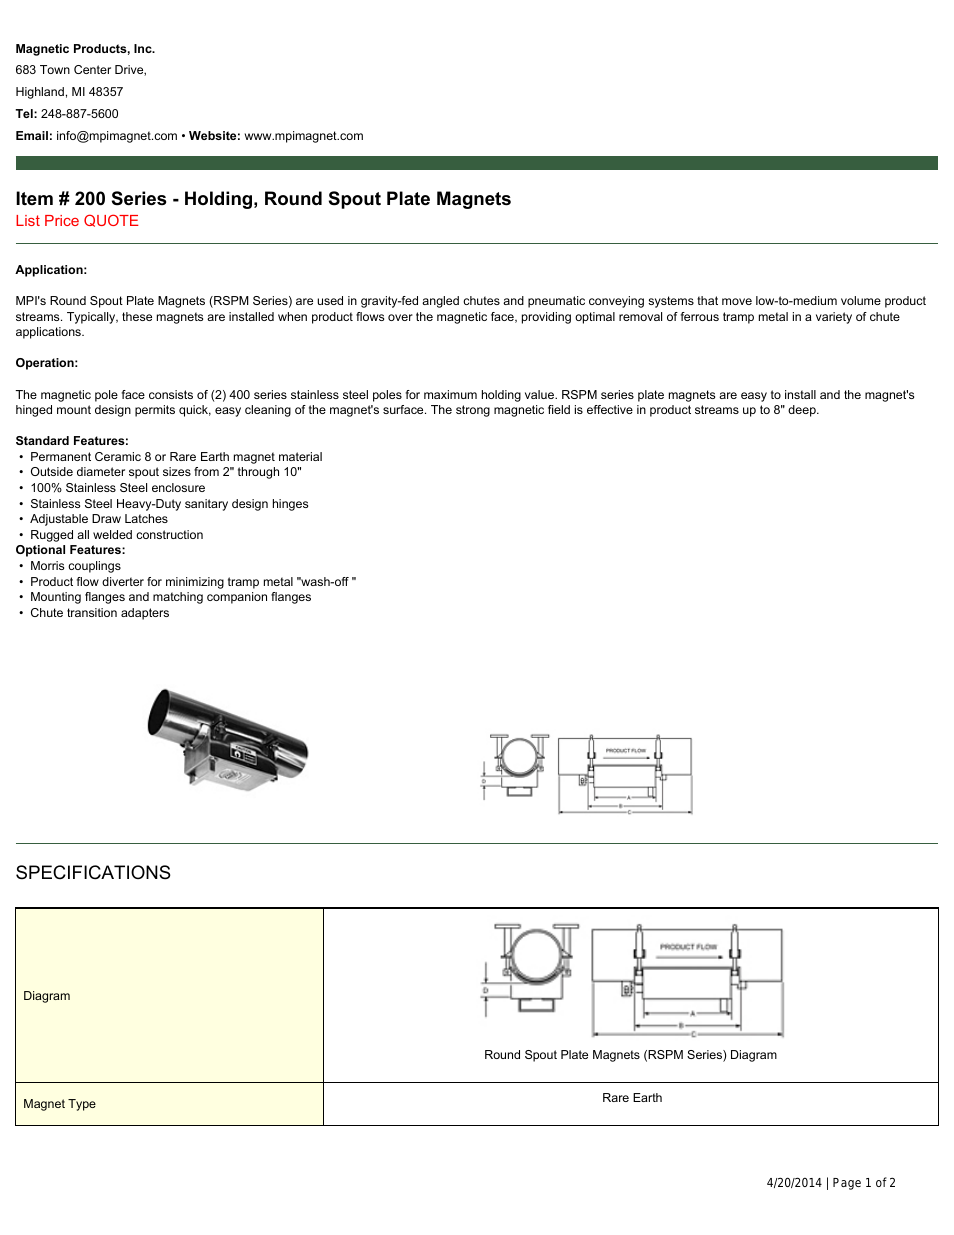 200 Series - Holding, Round Spout Plate Magnets